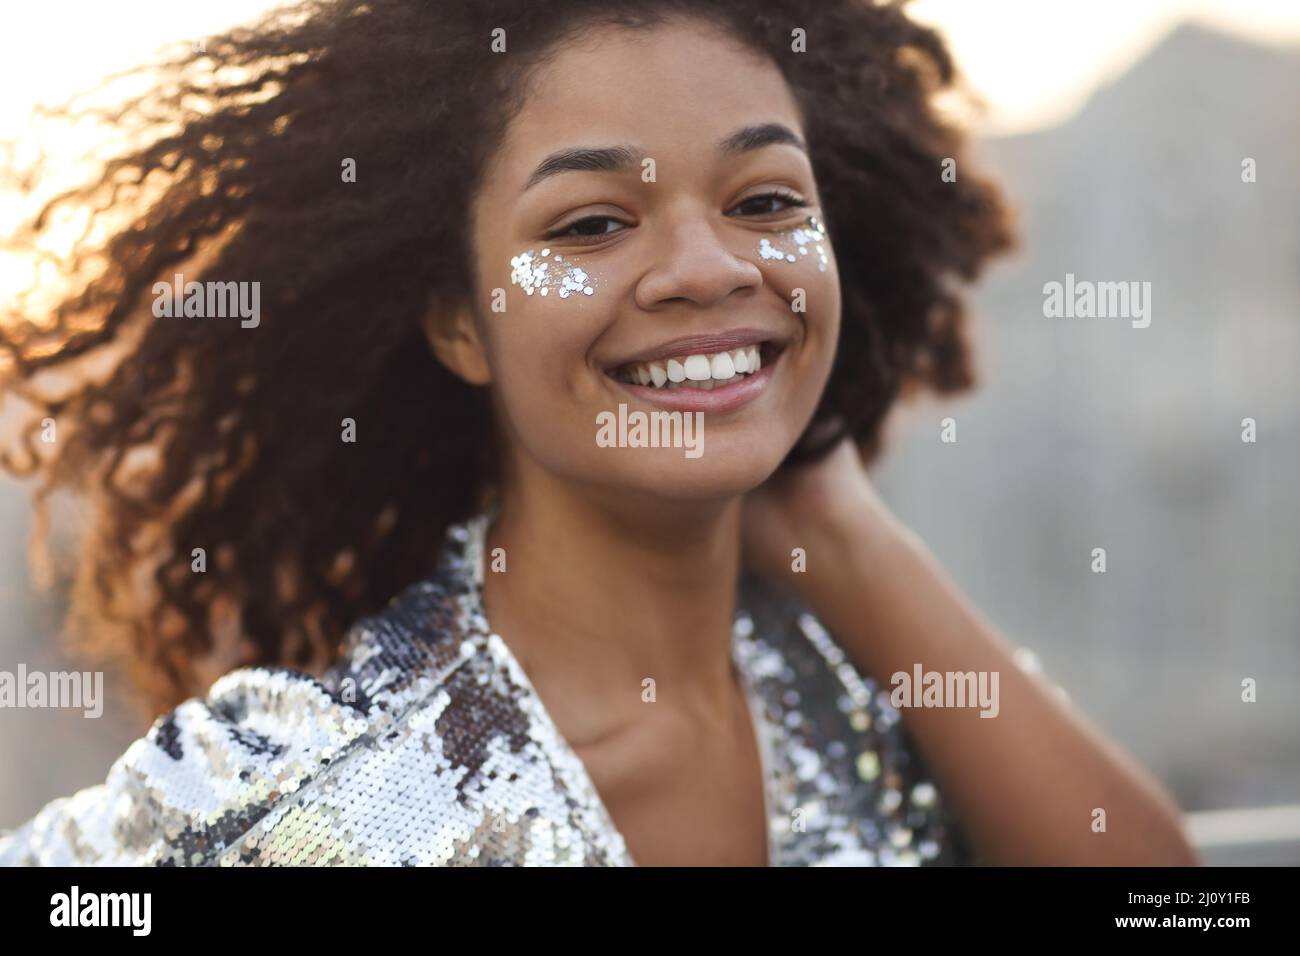 Close up portrait of overjoyed charming african american woman with curly hair and glitter on cheekbones smiling happily at came Stock Photo